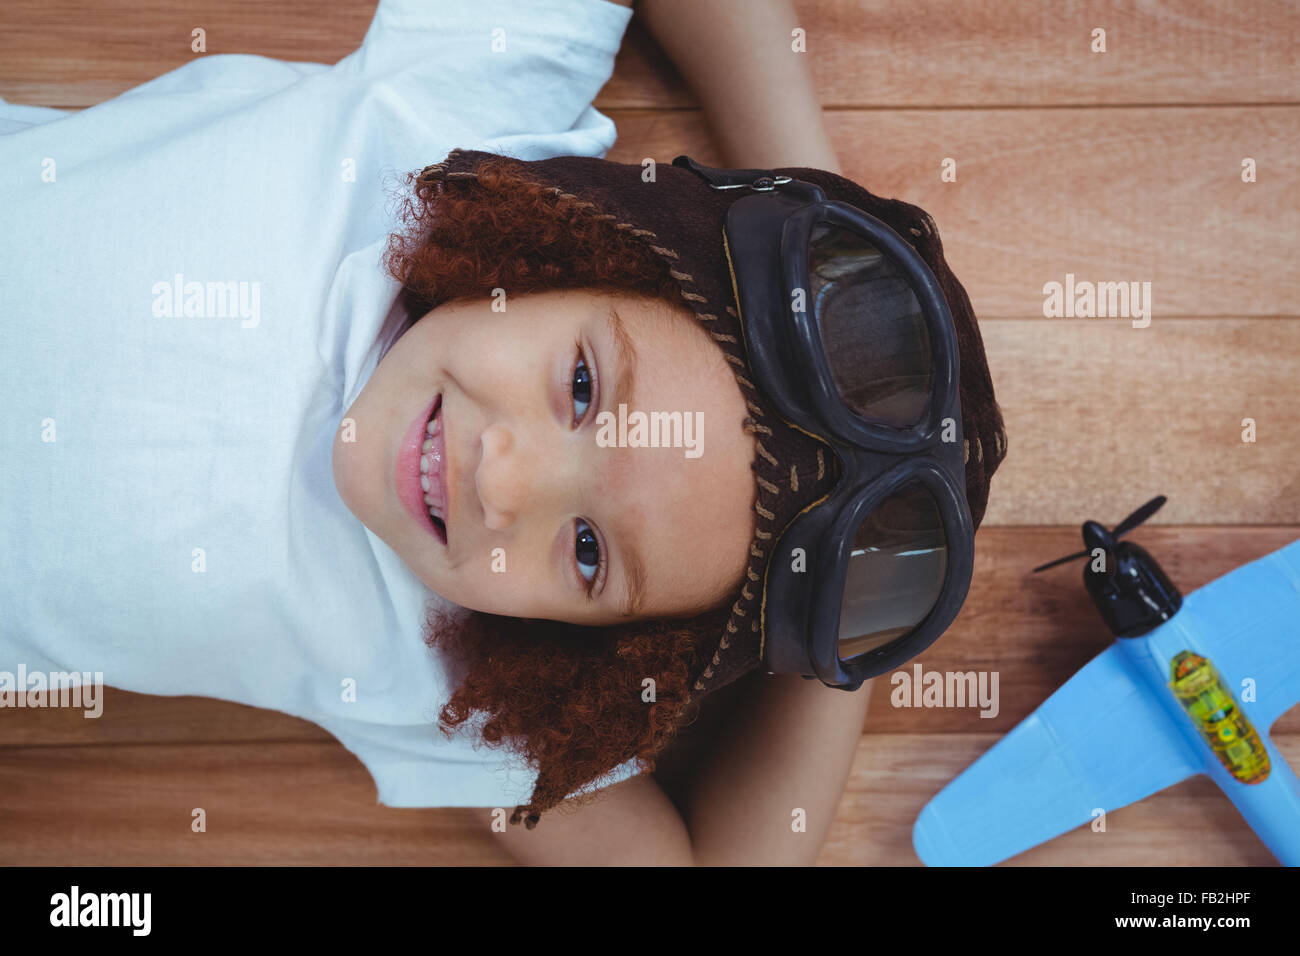 Smiling girl laying on the floor wearing aviator glasses and hat Stock Photo